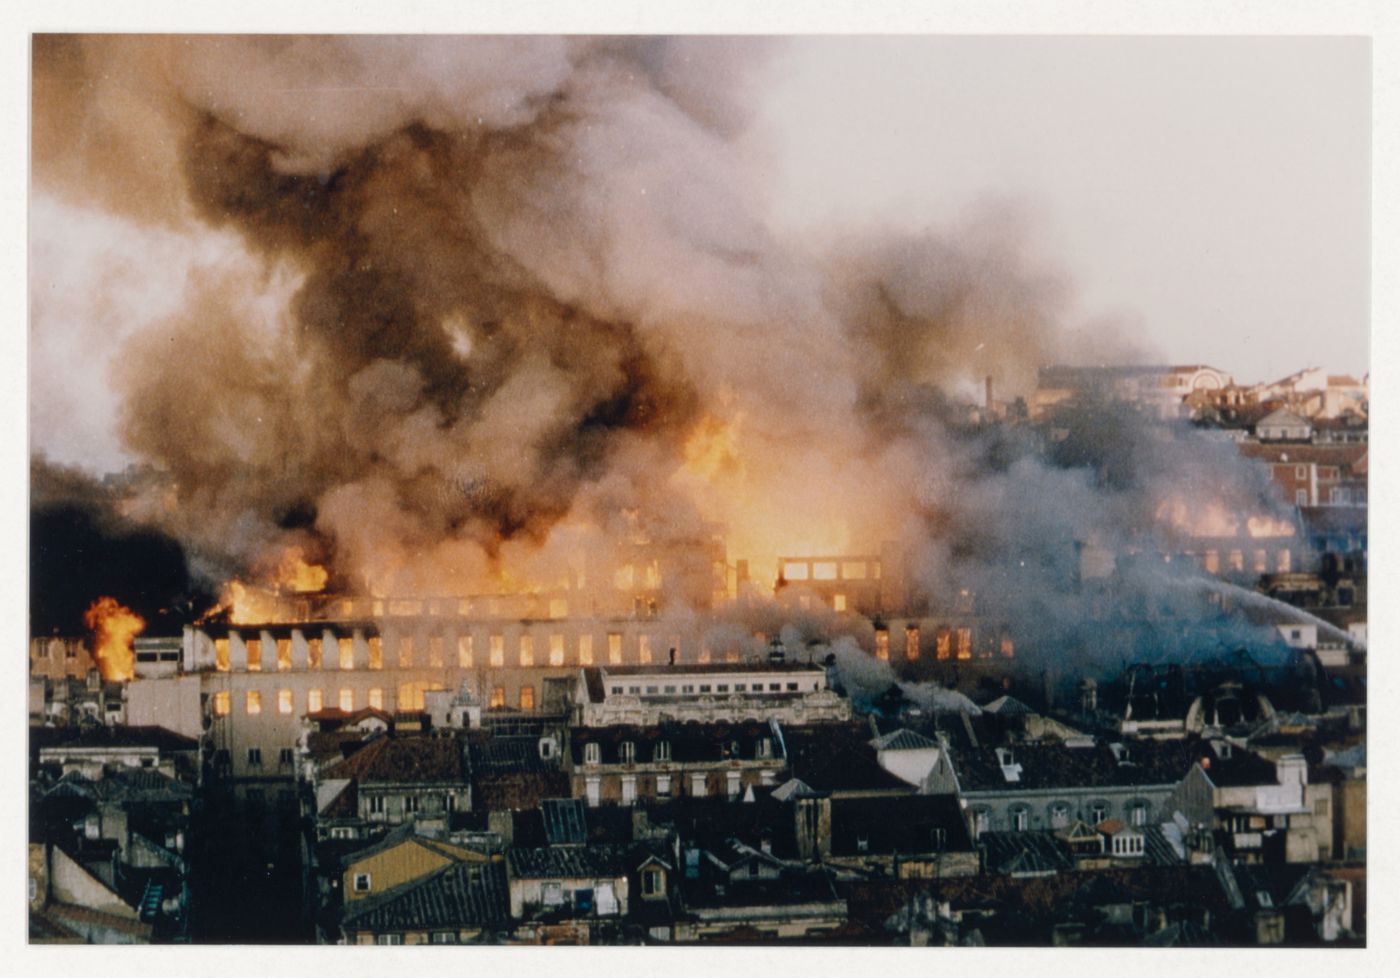 View of fire that broke out August 25, 1988, at Chiado, Lisbon, from Álvaro Siza's project file "Reconstruction of the Chiado area, Lisbon, Portugal"